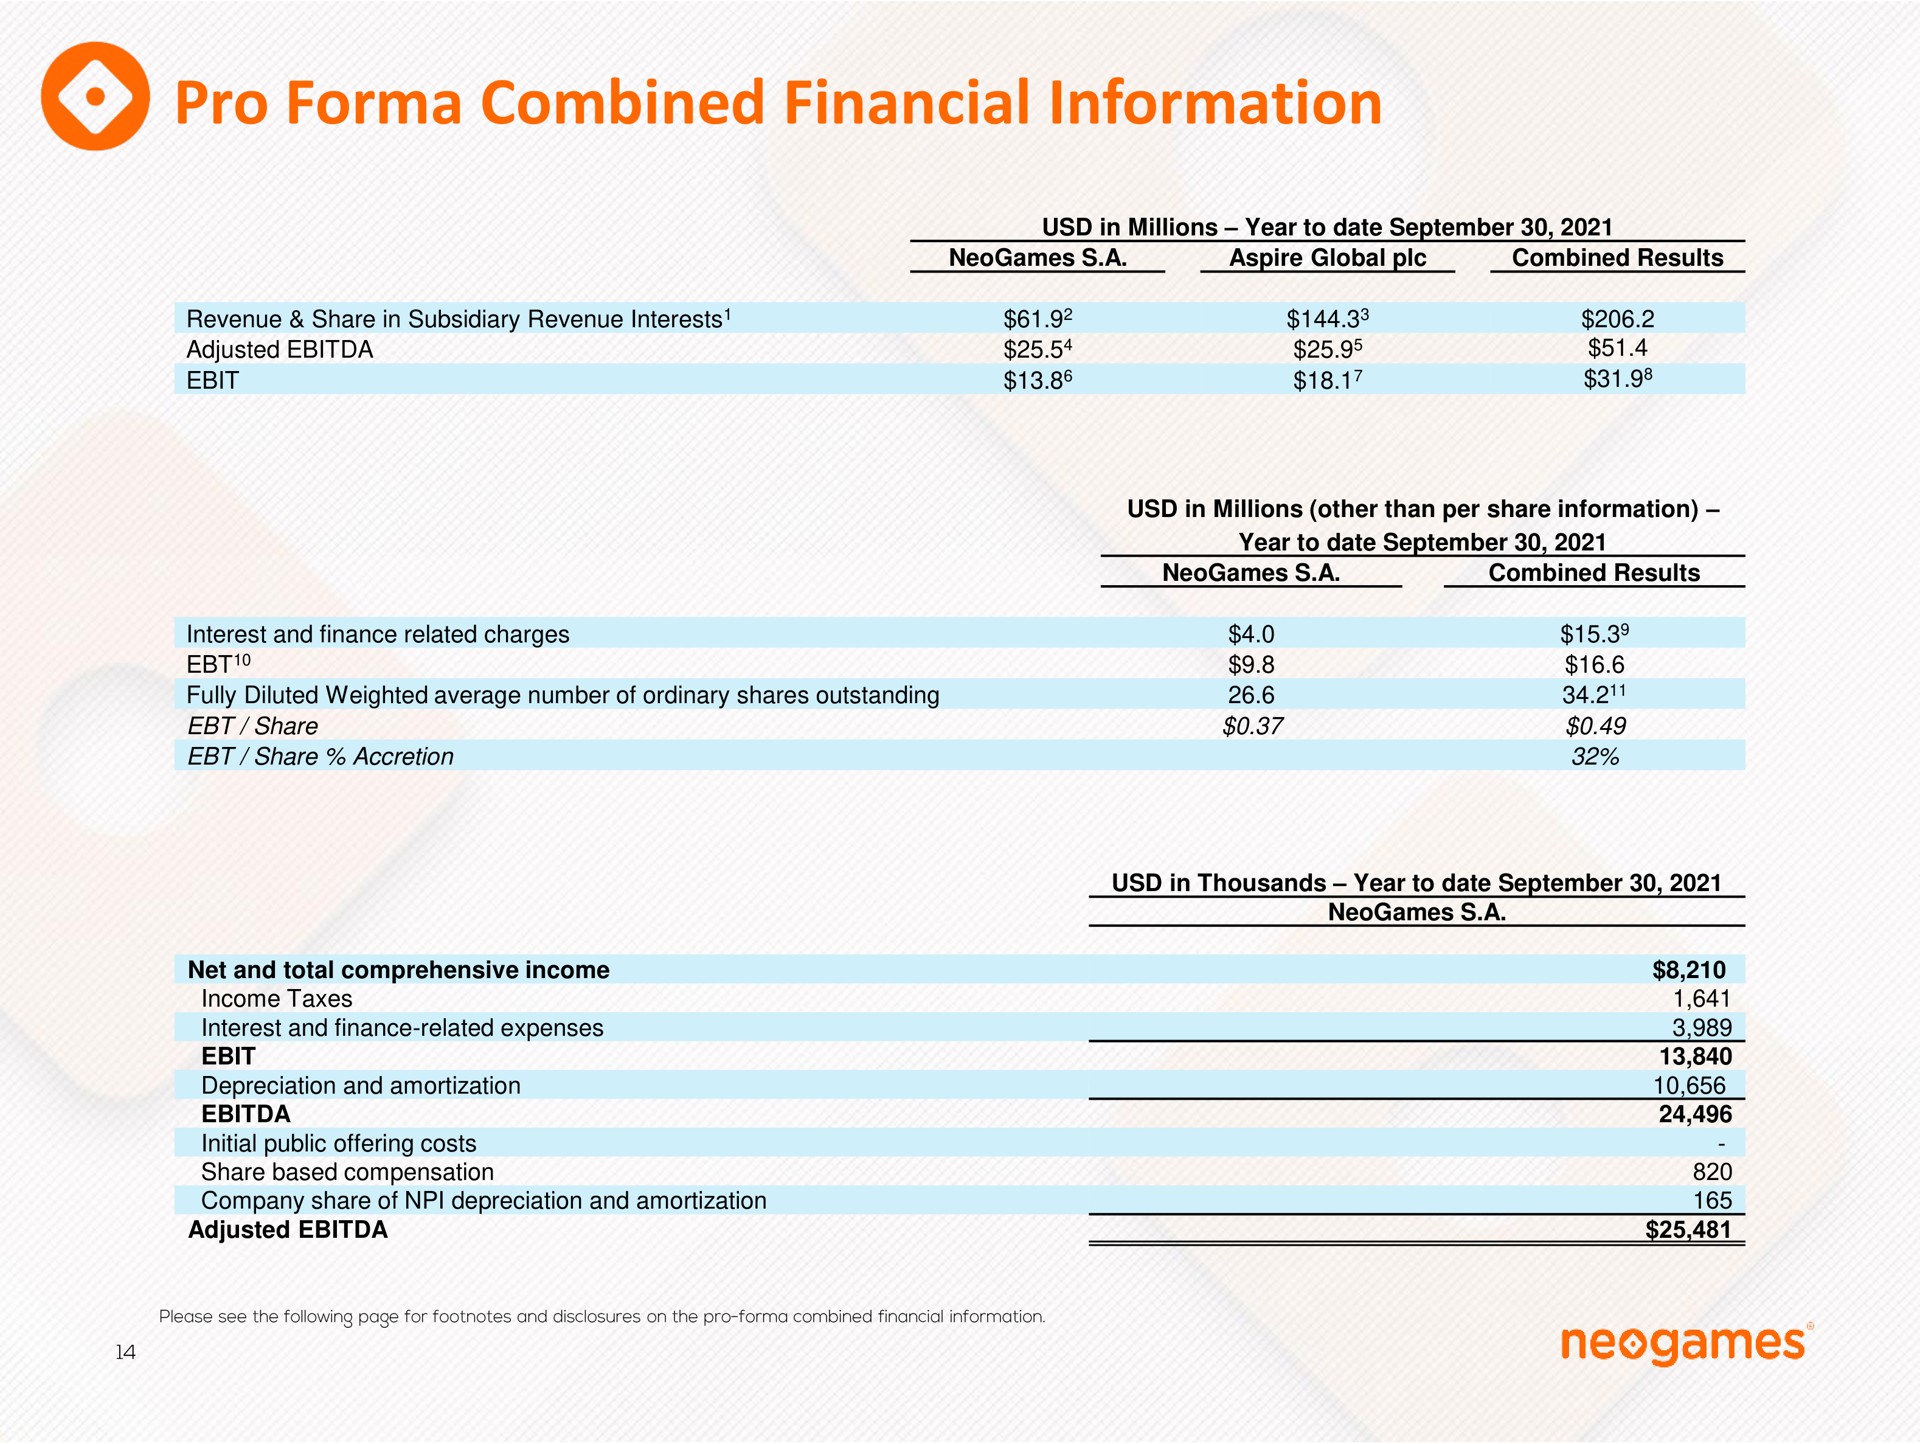 pro combined financial information results | Neogames